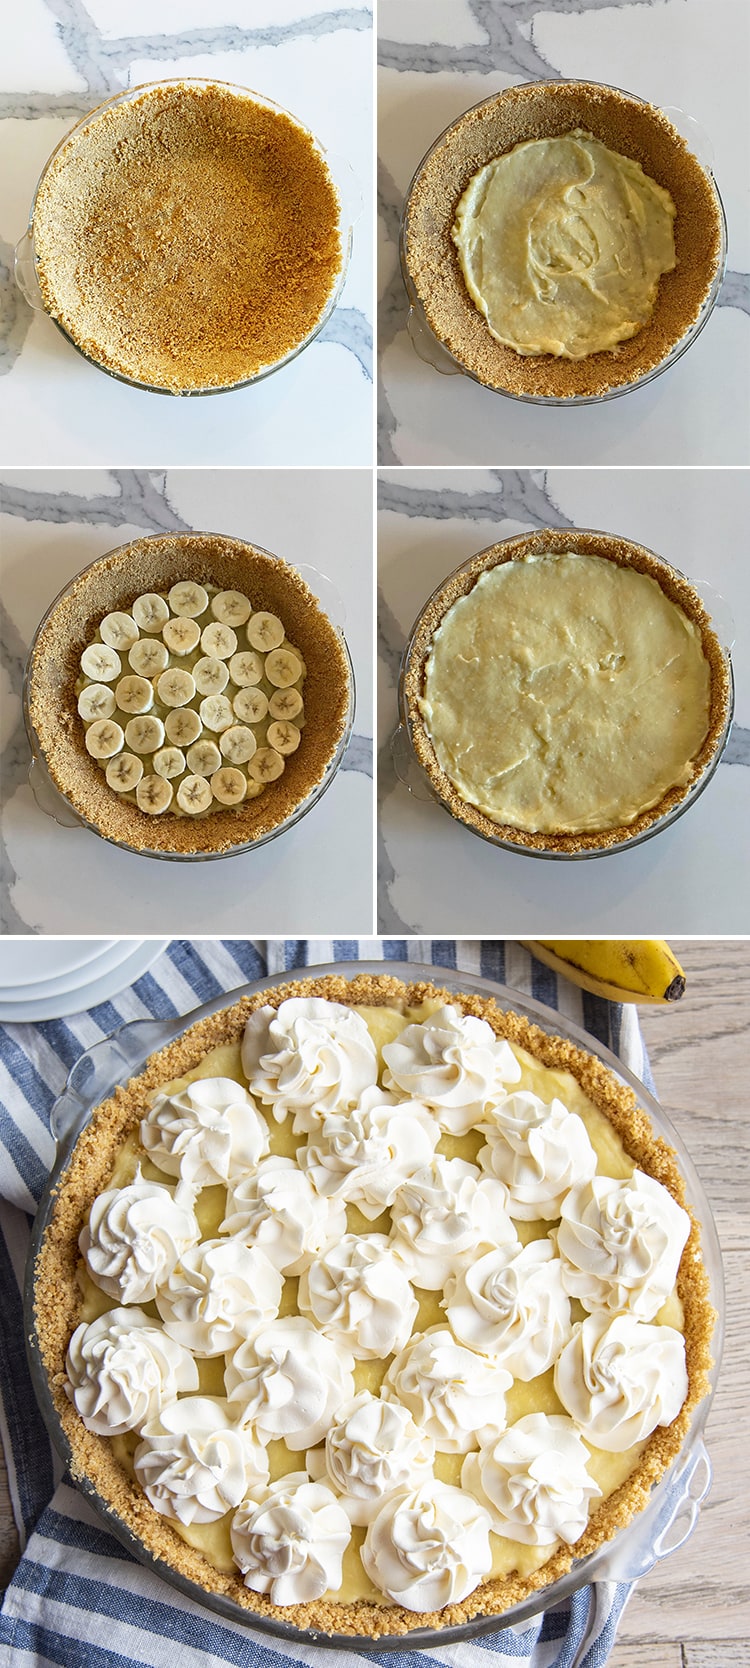 Step by Step photos of a banana cream pie being put together.